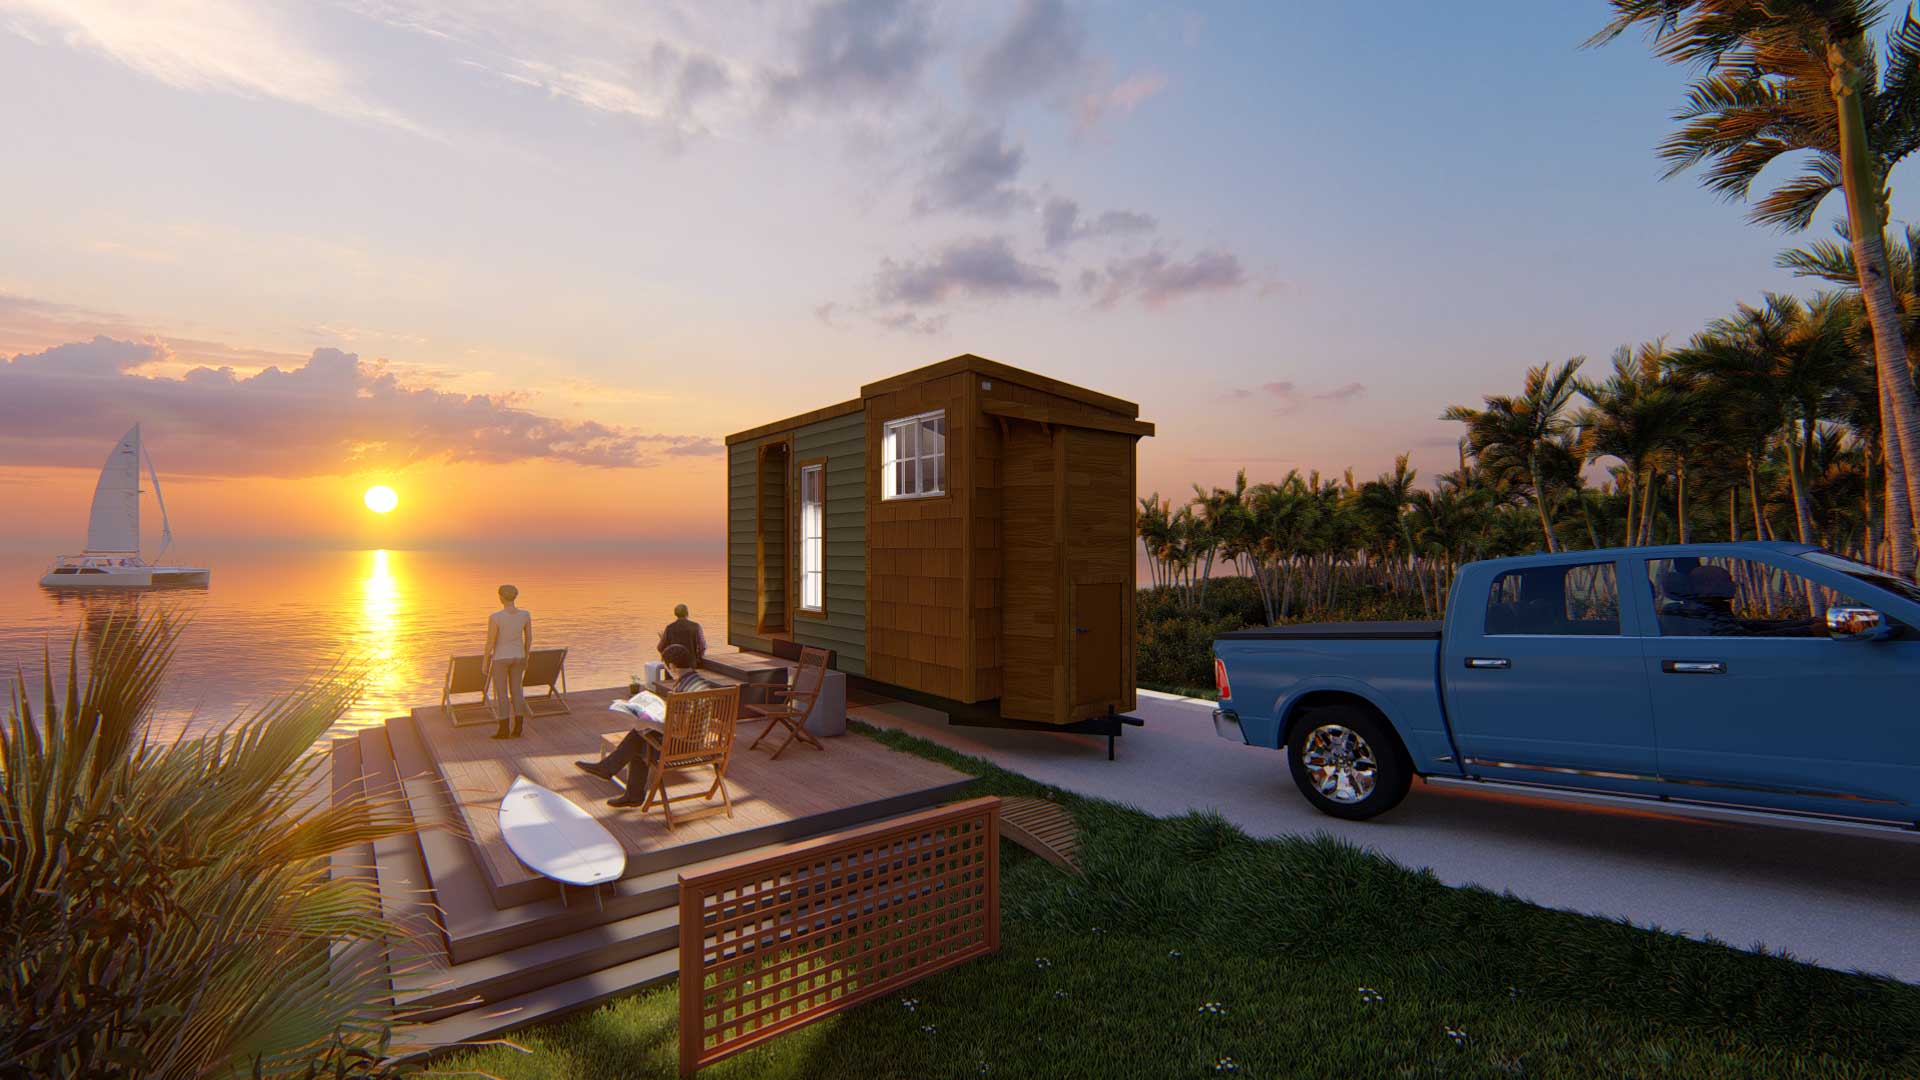 3d model of Keepsake tiny home in the craftsman style overlooking the ocean at sunset